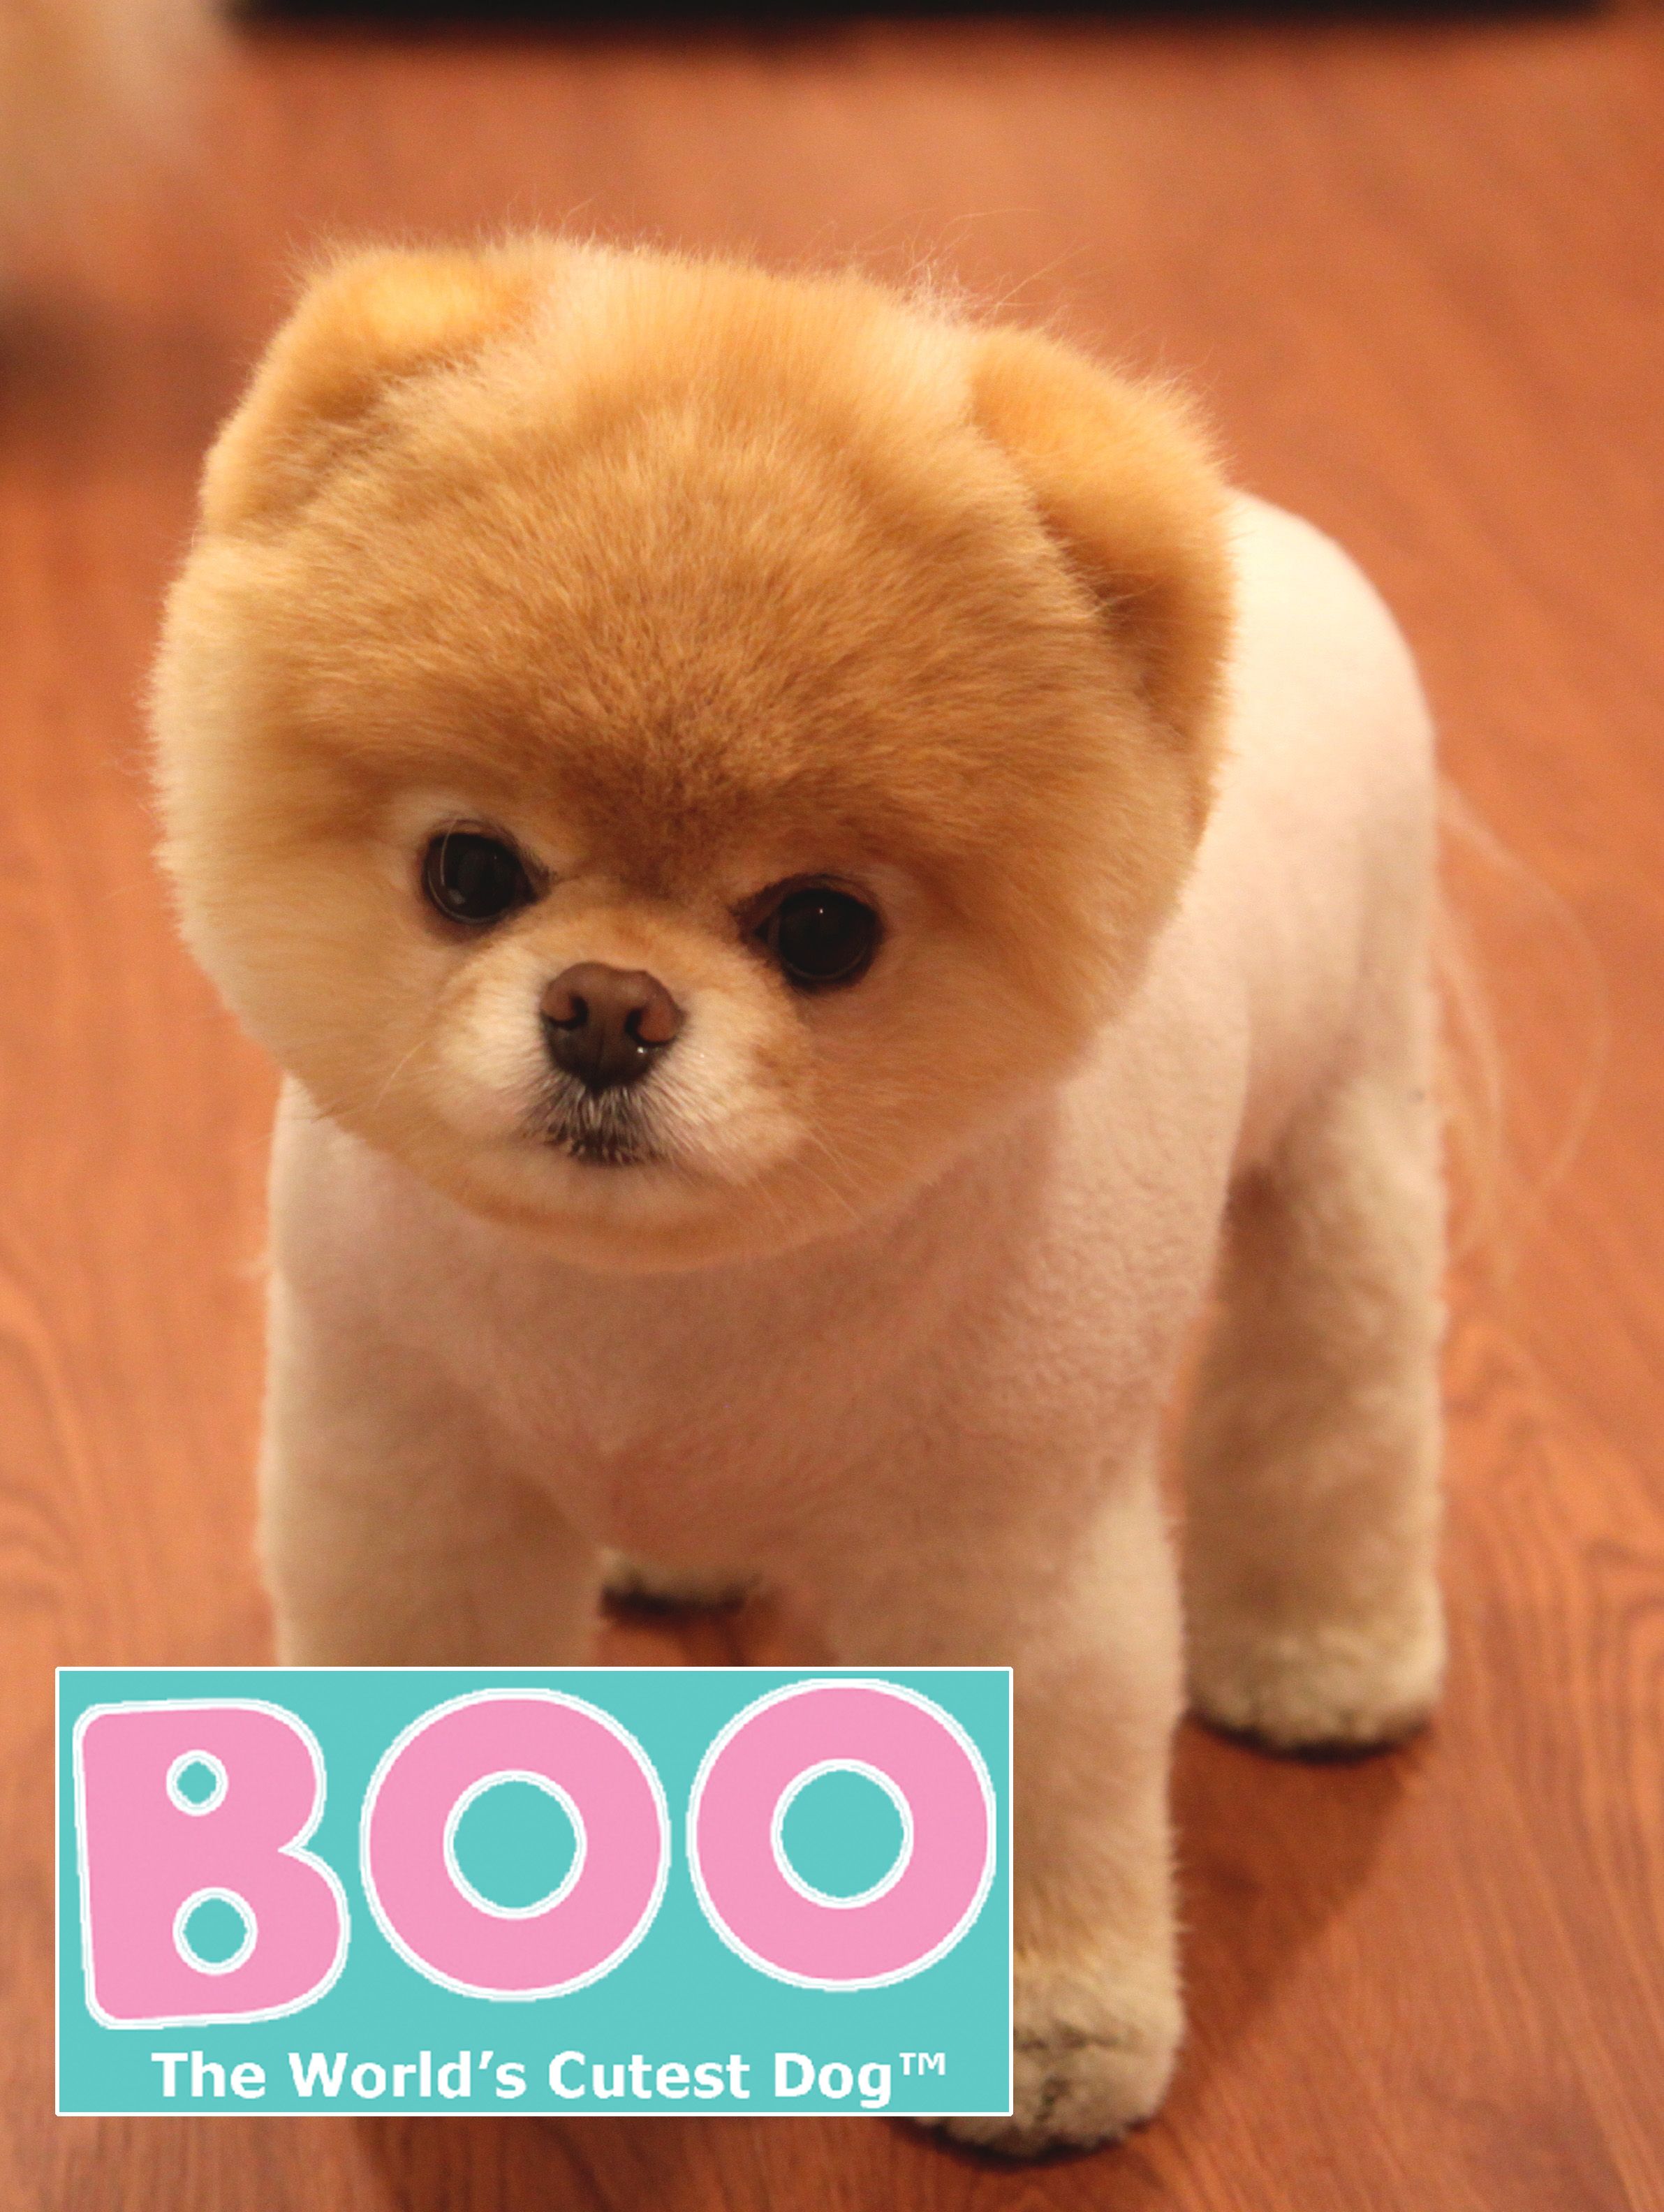 Free download Boo the Worlds Cutest Dog [2383x3168]